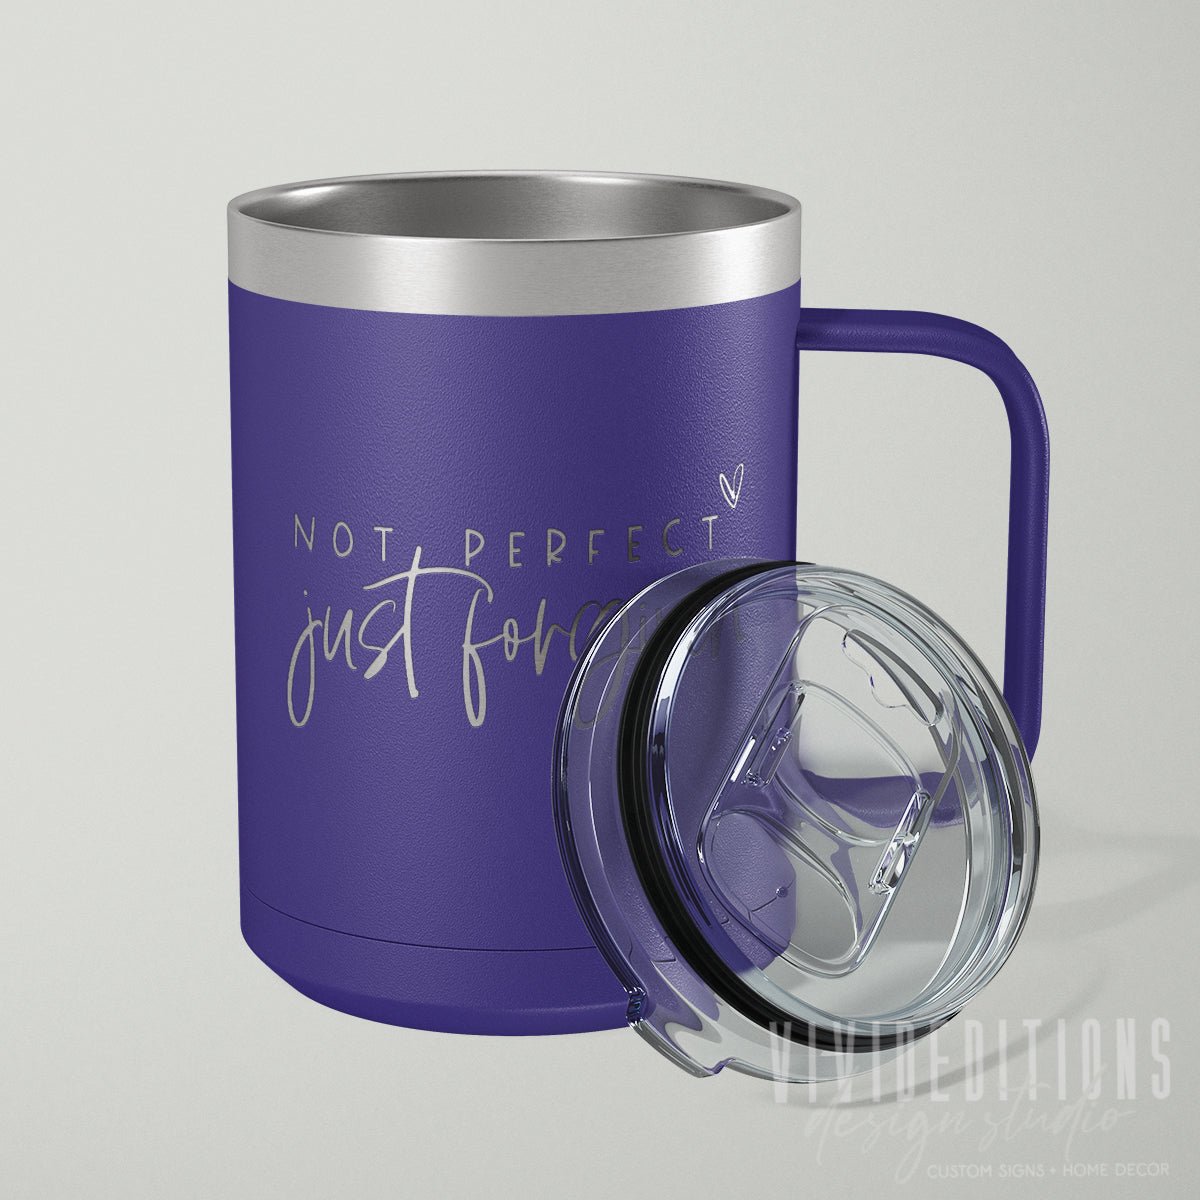 "Not Perfect Just Forgiven" Engraved Travel Coffee Mug with Slider Lid - 15oz (16 color options) Tumblers - VividEditions